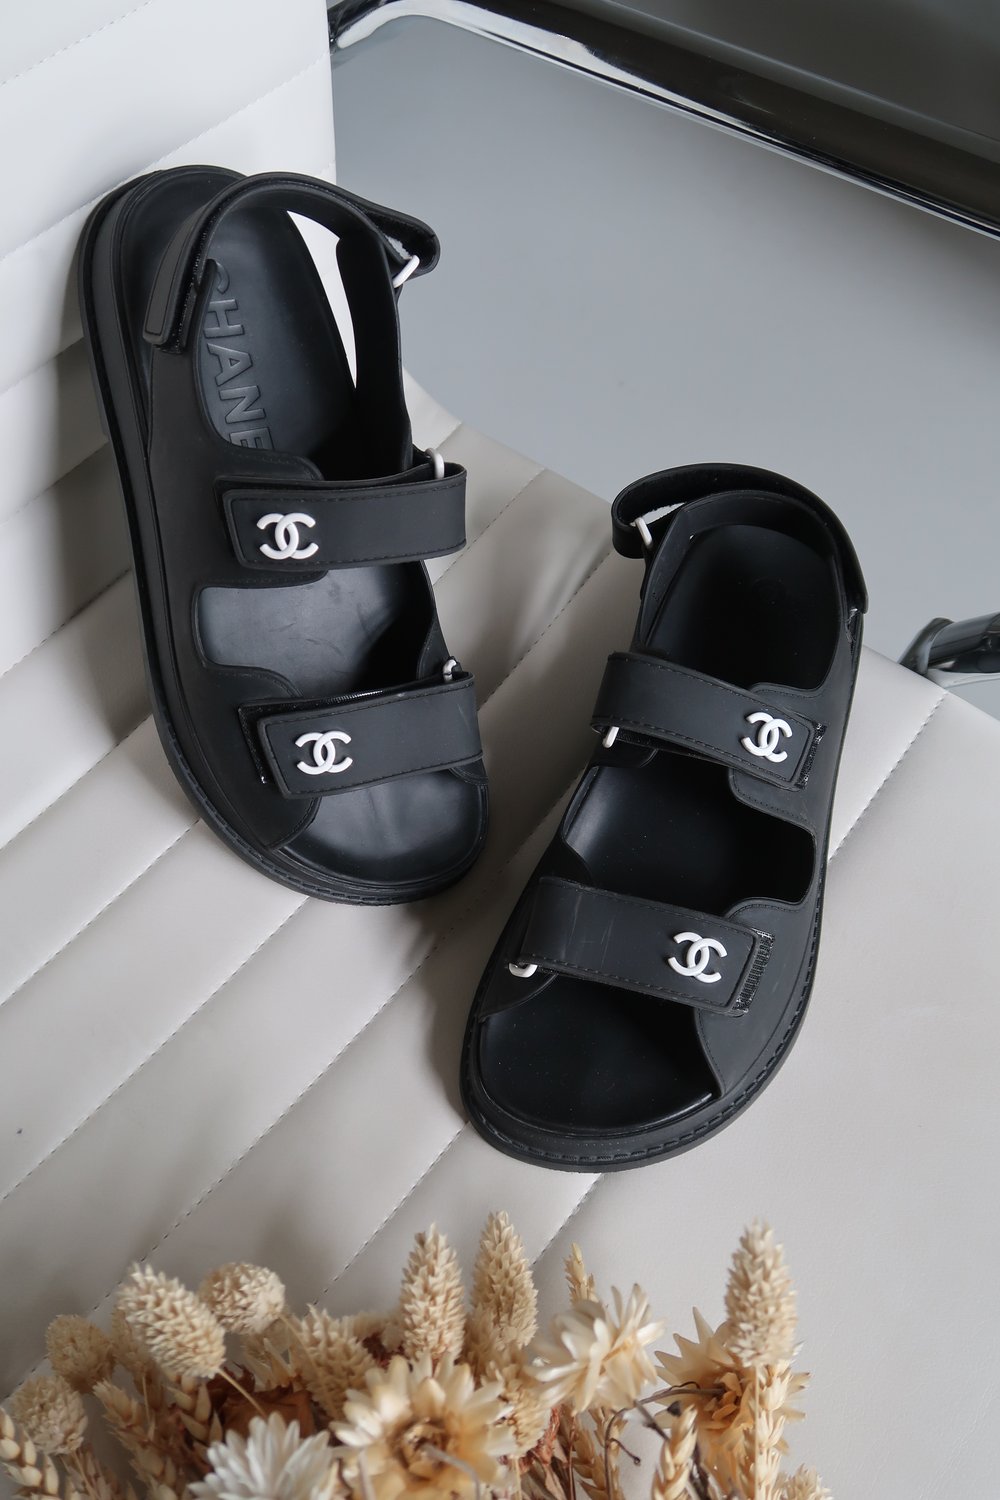 CHANEL Rubber CC Dad Sandals 39 Navy 764673